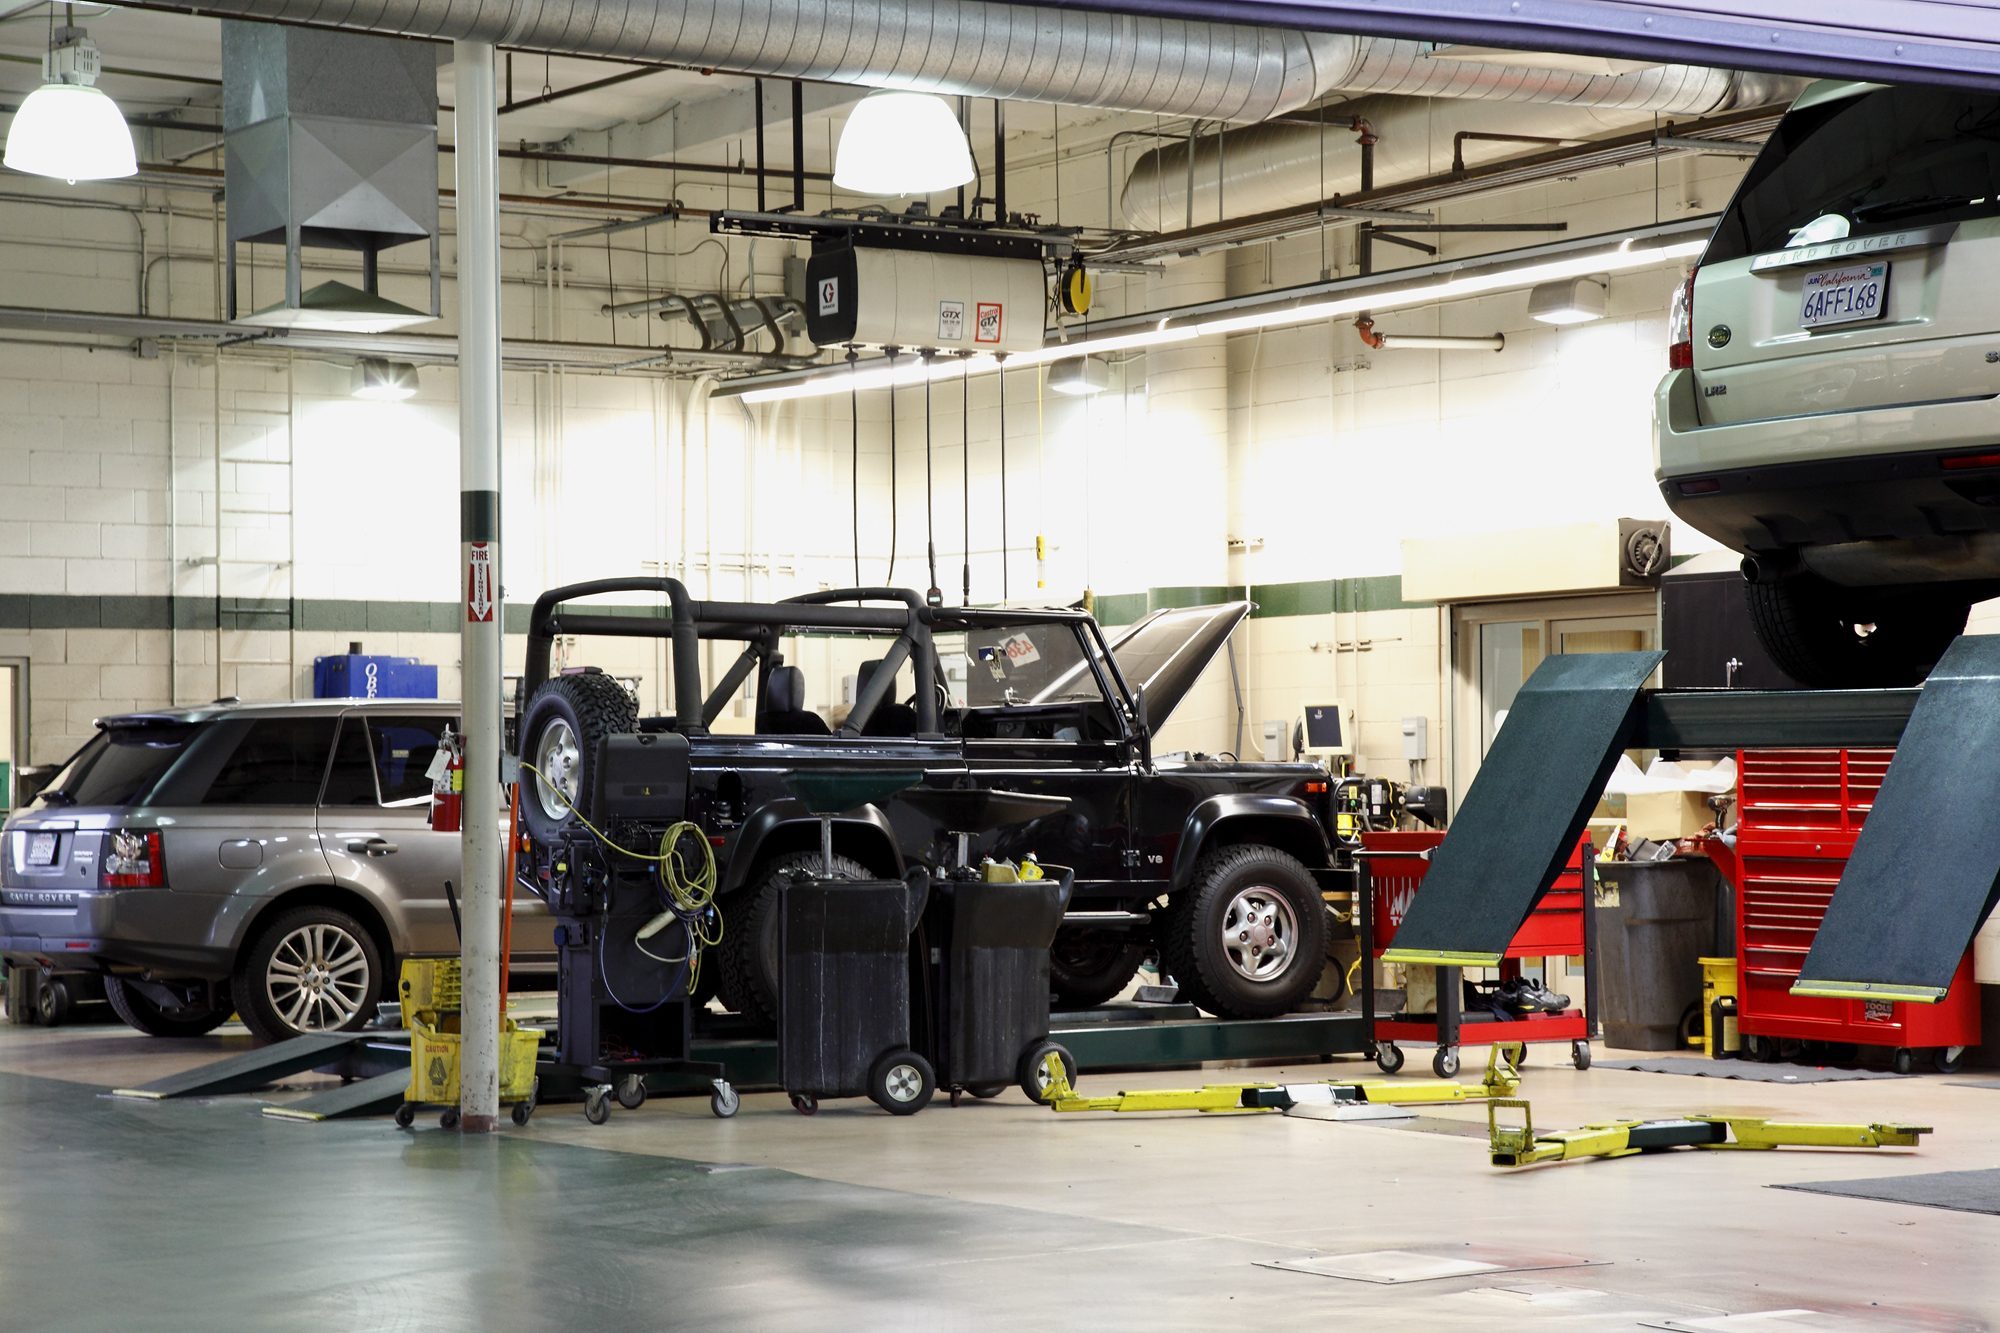 Hance's European does quality land rover repairs